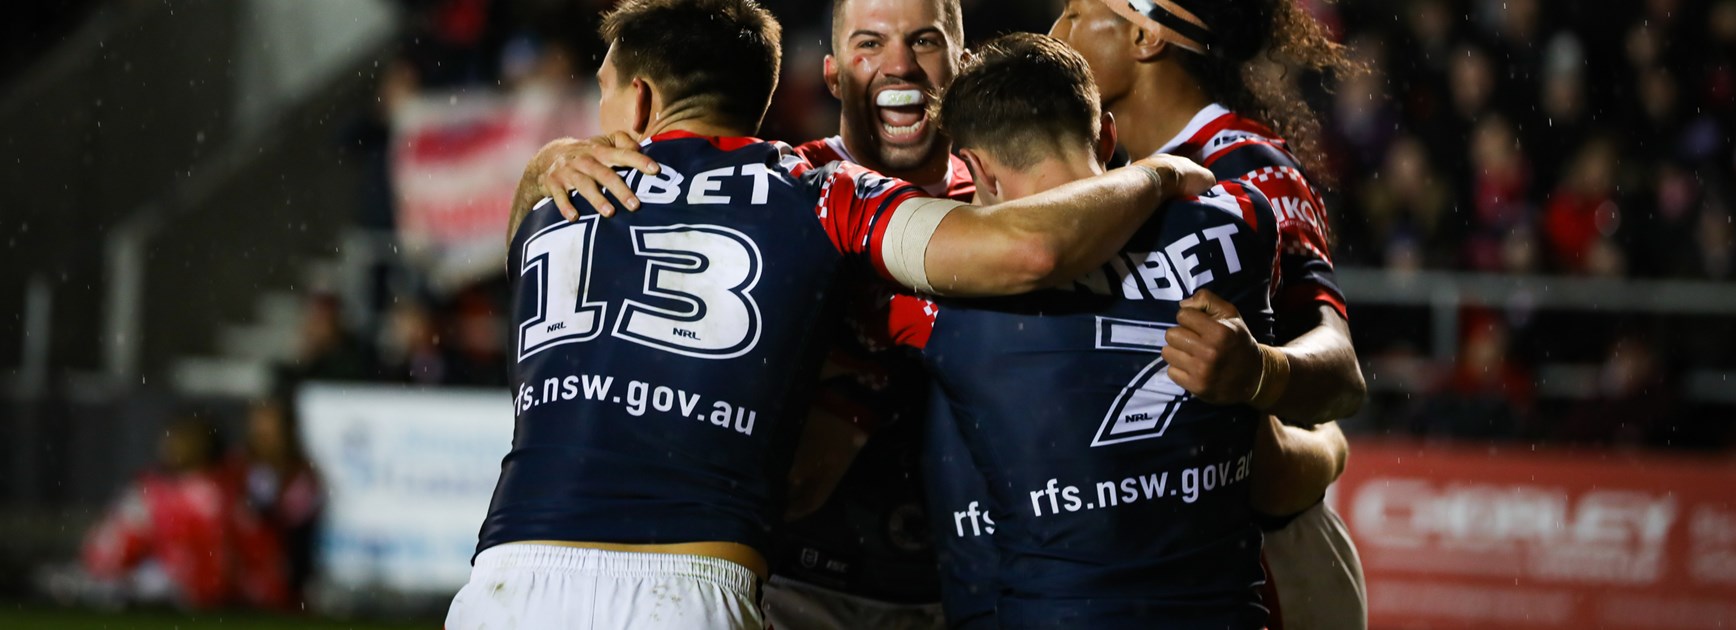 And the winner is ... Sydney: Roosters rule global roost